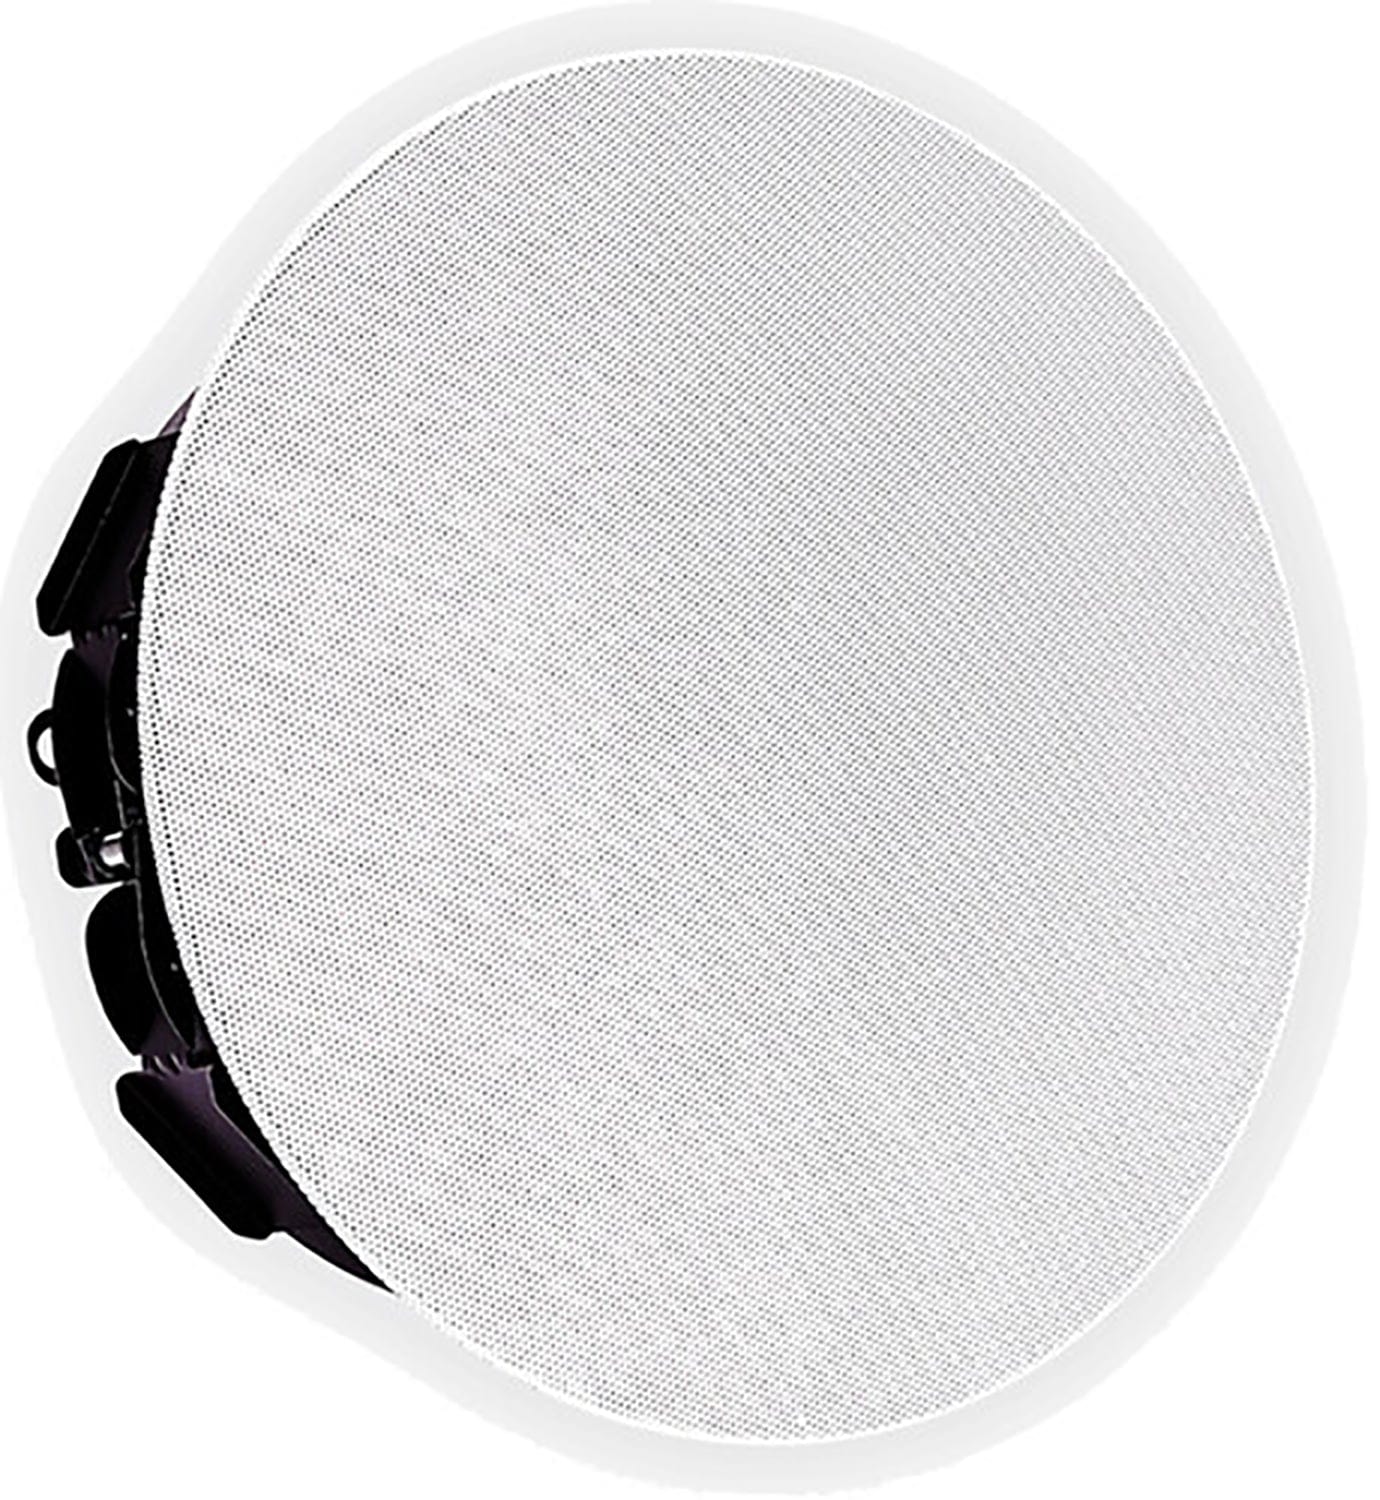 Shure MXN5W-C 5.25 Inch Ceiling Dante Networked Loudspeaker - White - PSSL ProSound and Stage Lighting